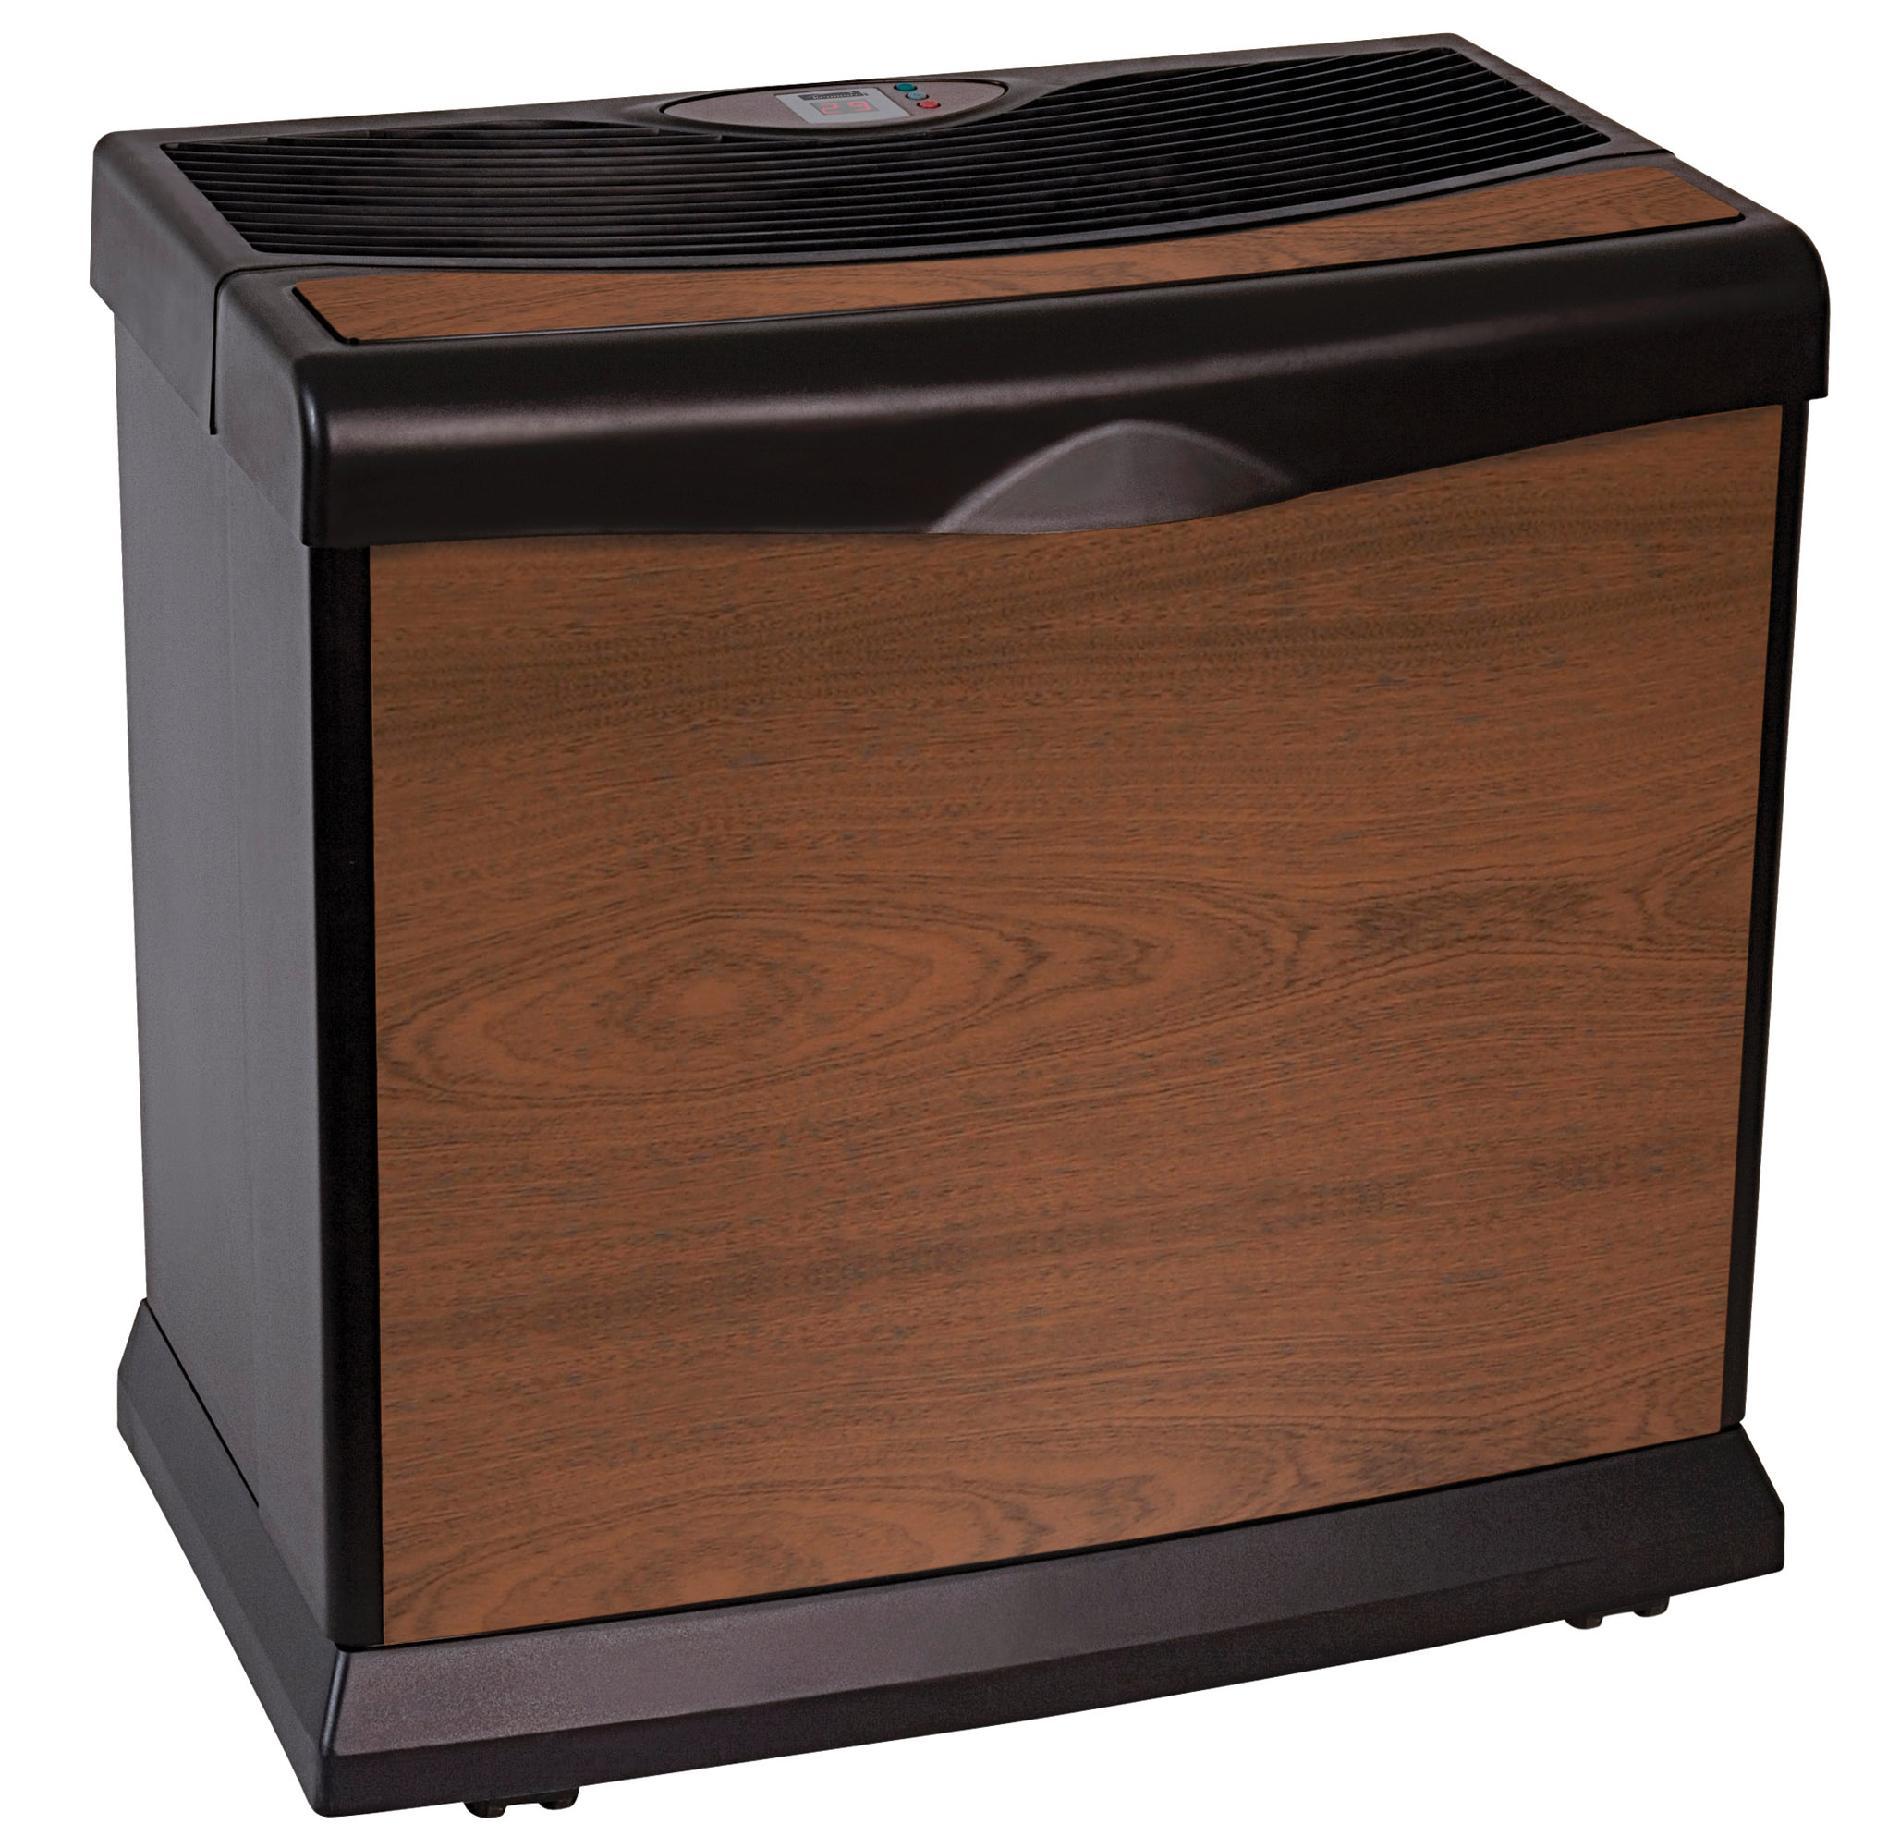 UPC 043129256071 product image for Kenmore Humidifier with 14 Gallon Daily Output - ESSICK AIR PRODUCTS | upcitemdb.com